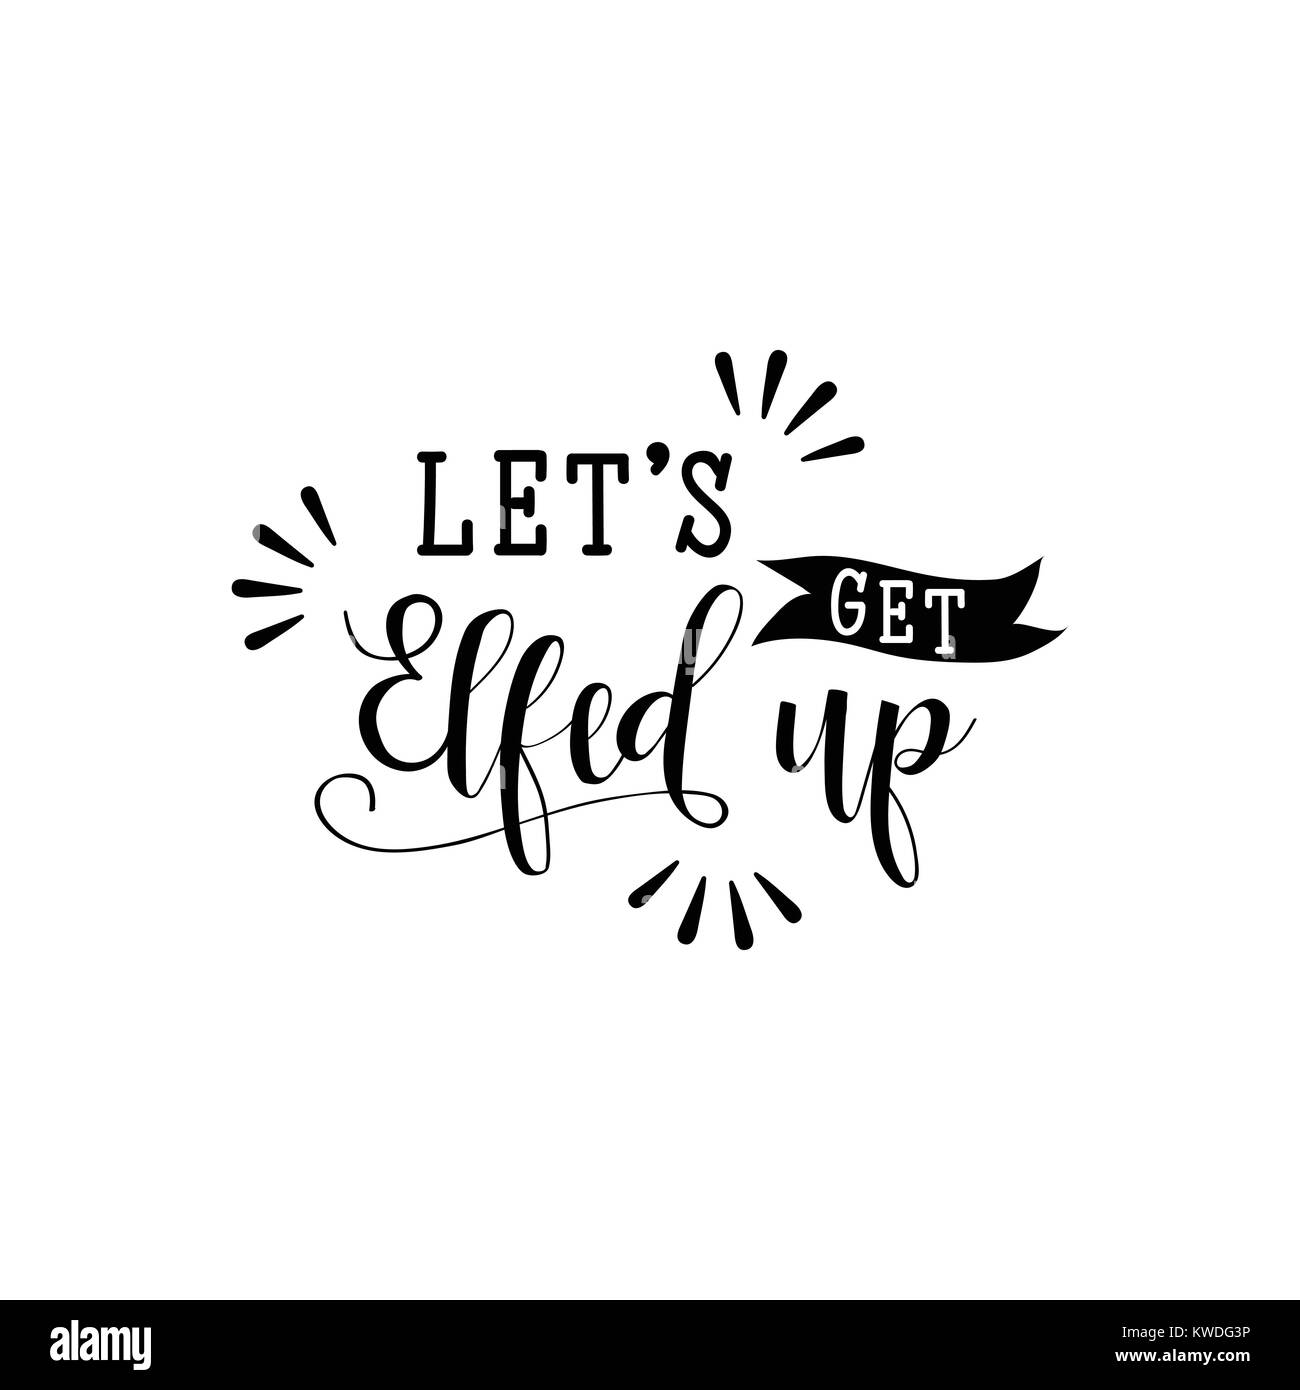 let's get elfed up. Calligraphy inspiration graphic design typography element for print. Hand written postcard. Print for poster, t-shirt, sweatshirt, Stock Vector